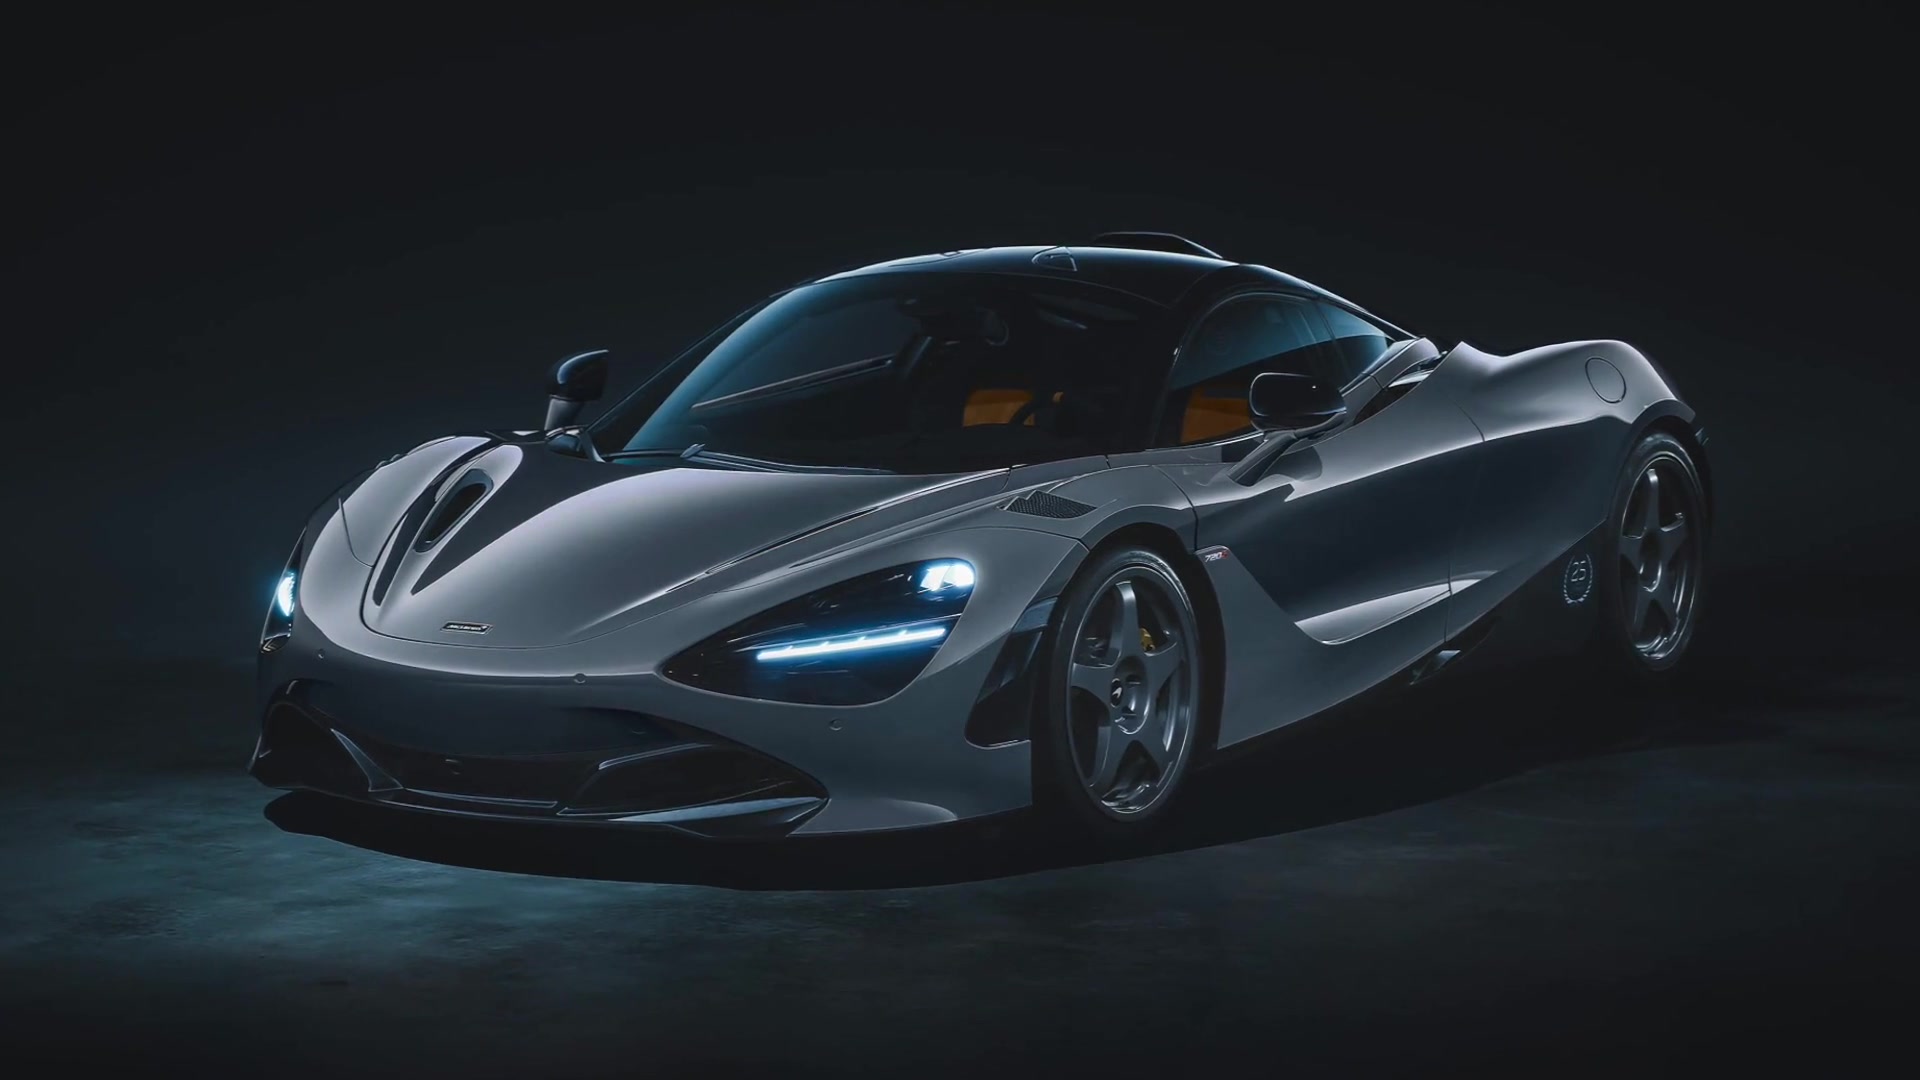 720S Le Mans special edition celebrates 25th anniversary of legendary McLaren victory